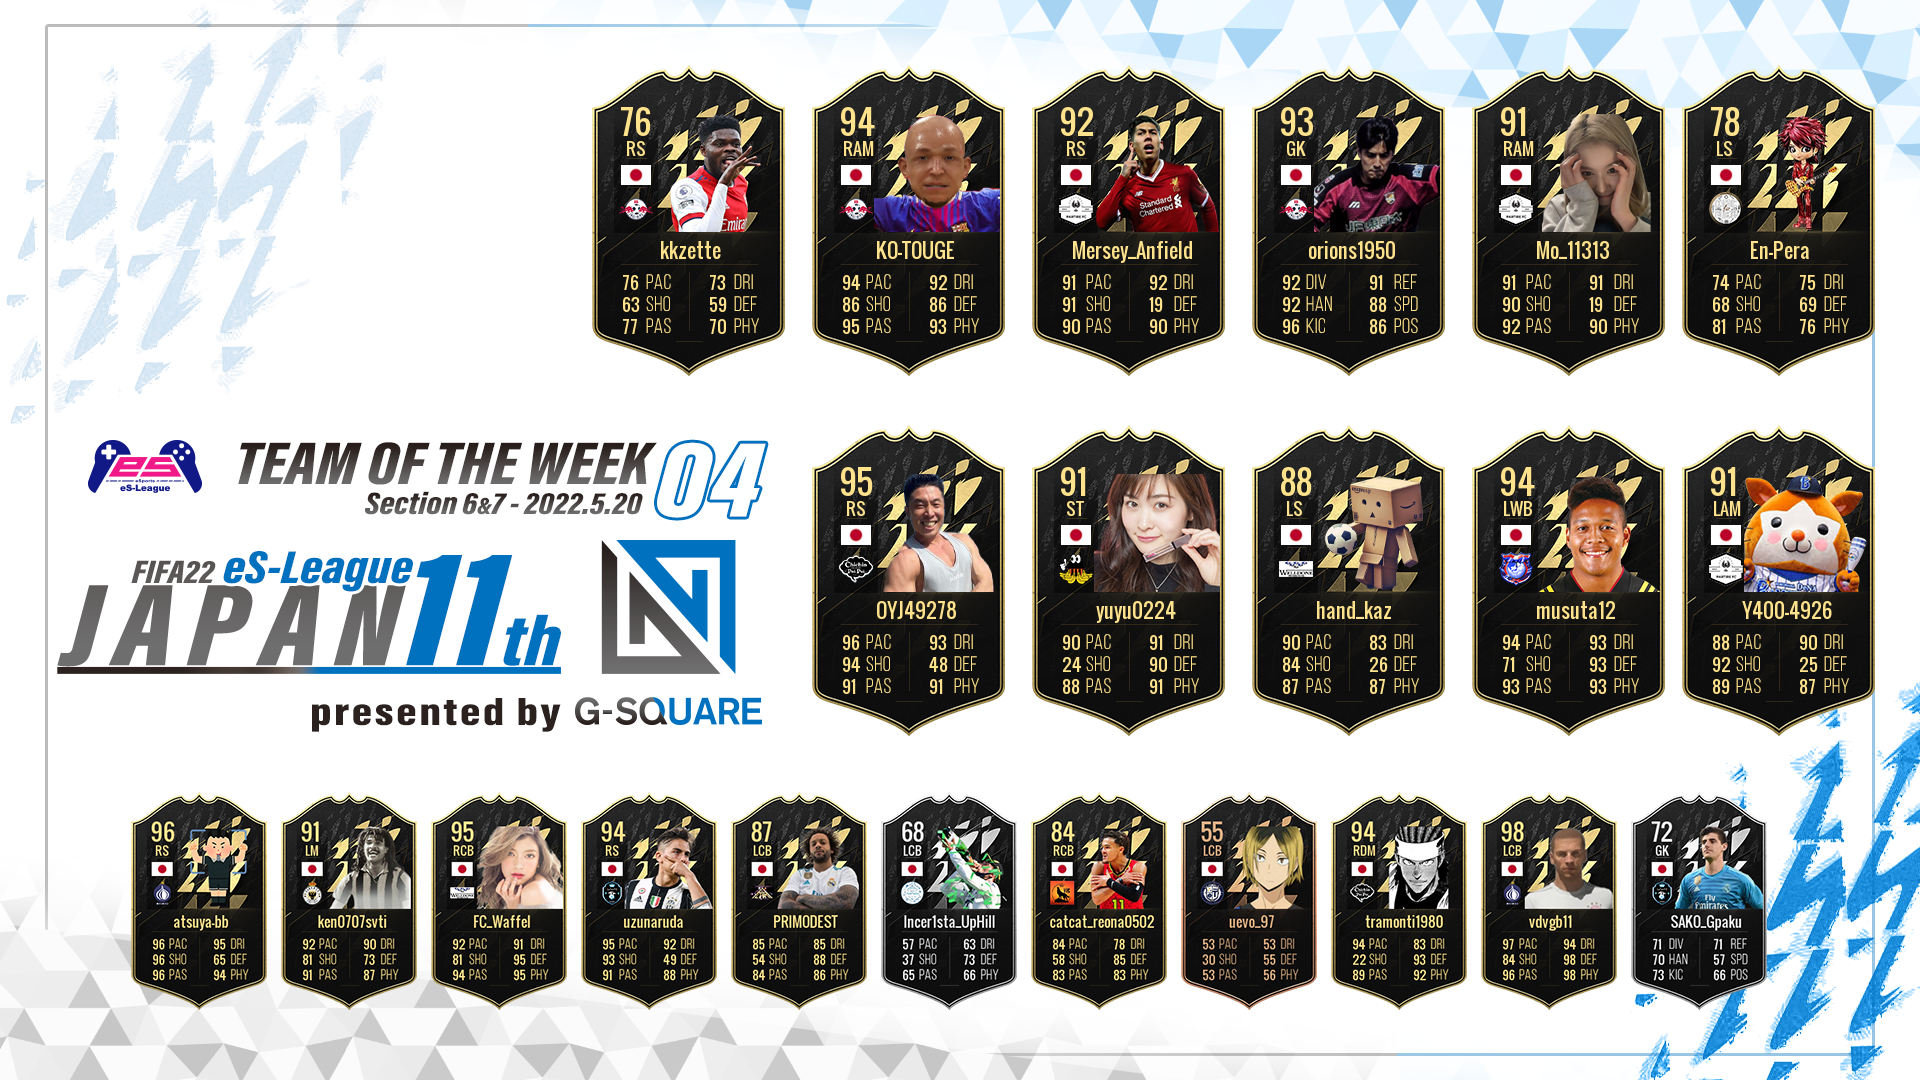 FIFA22 eS-League JAPAN 11th presented by G-SQUARE TOTW04